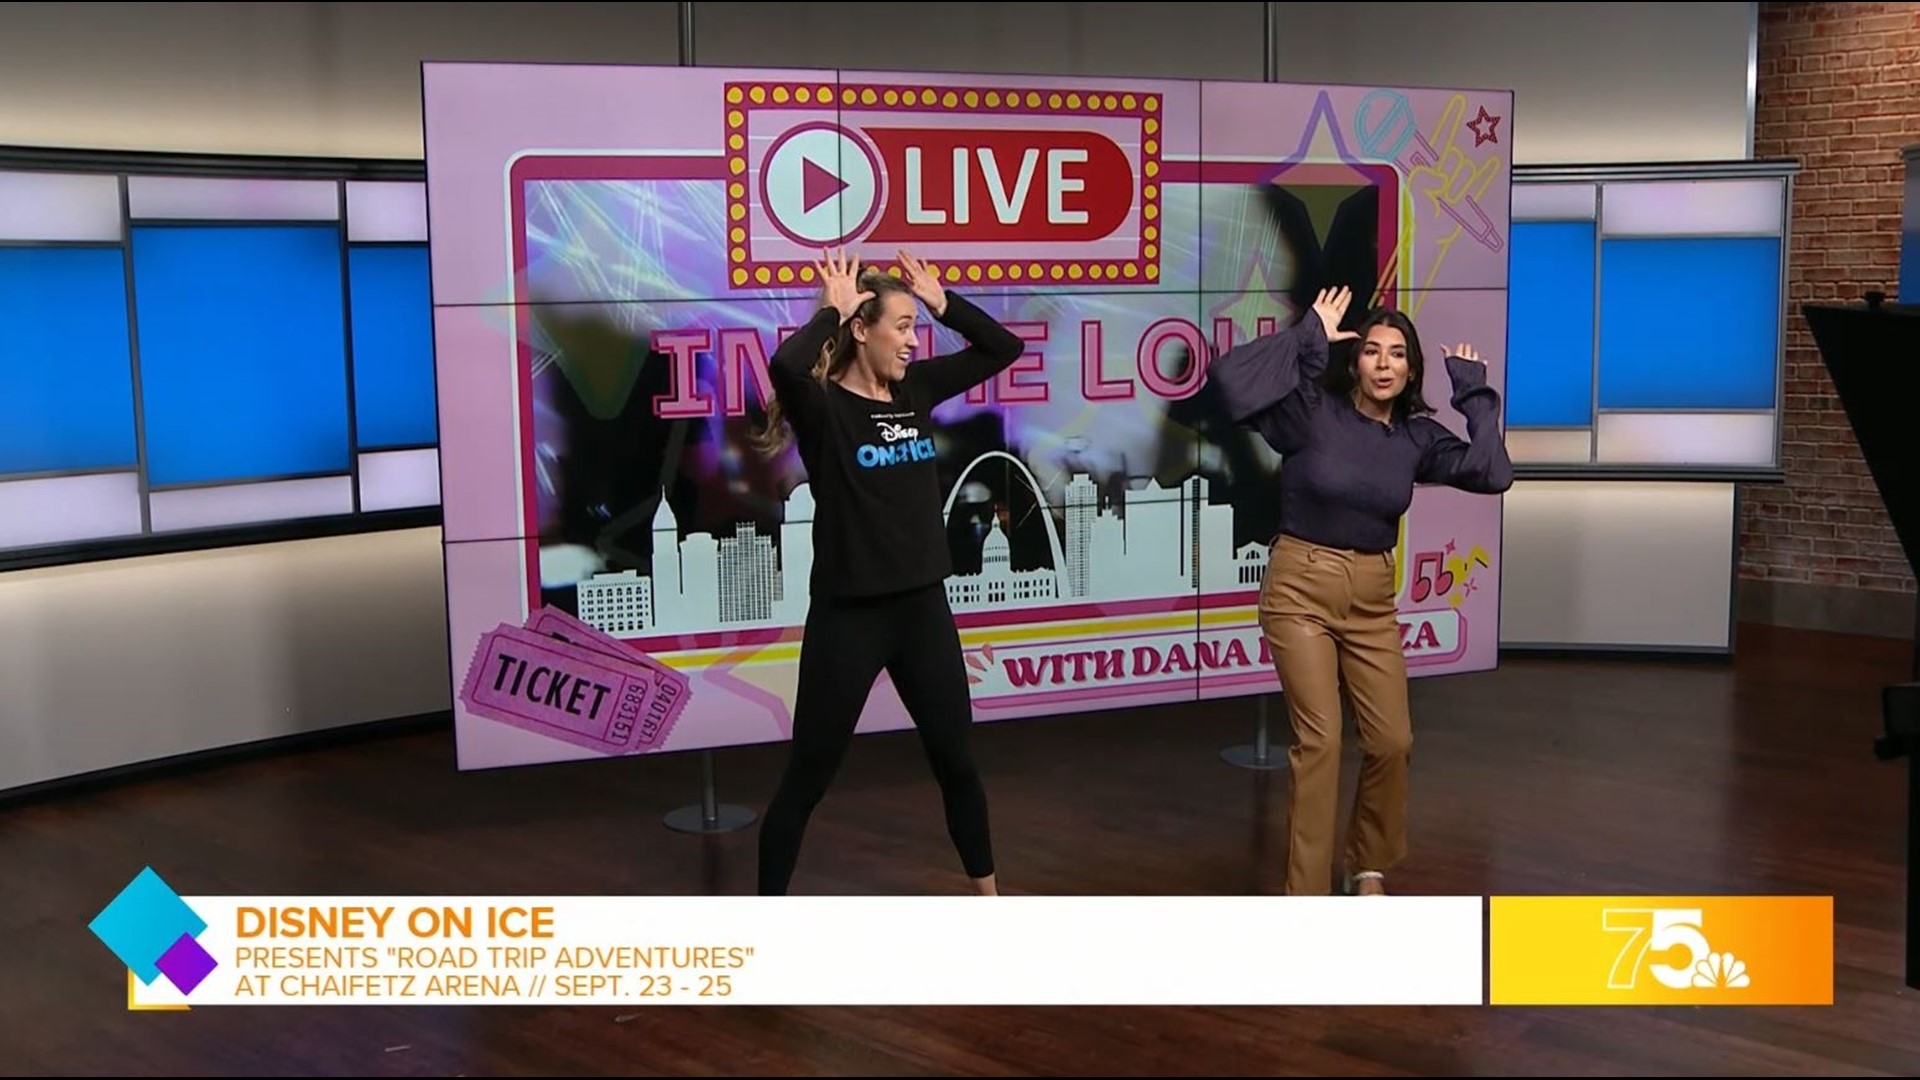 Our entertainment expert, Dana DiPiazza, takes dancing and cooking lessons from the stars of the show.